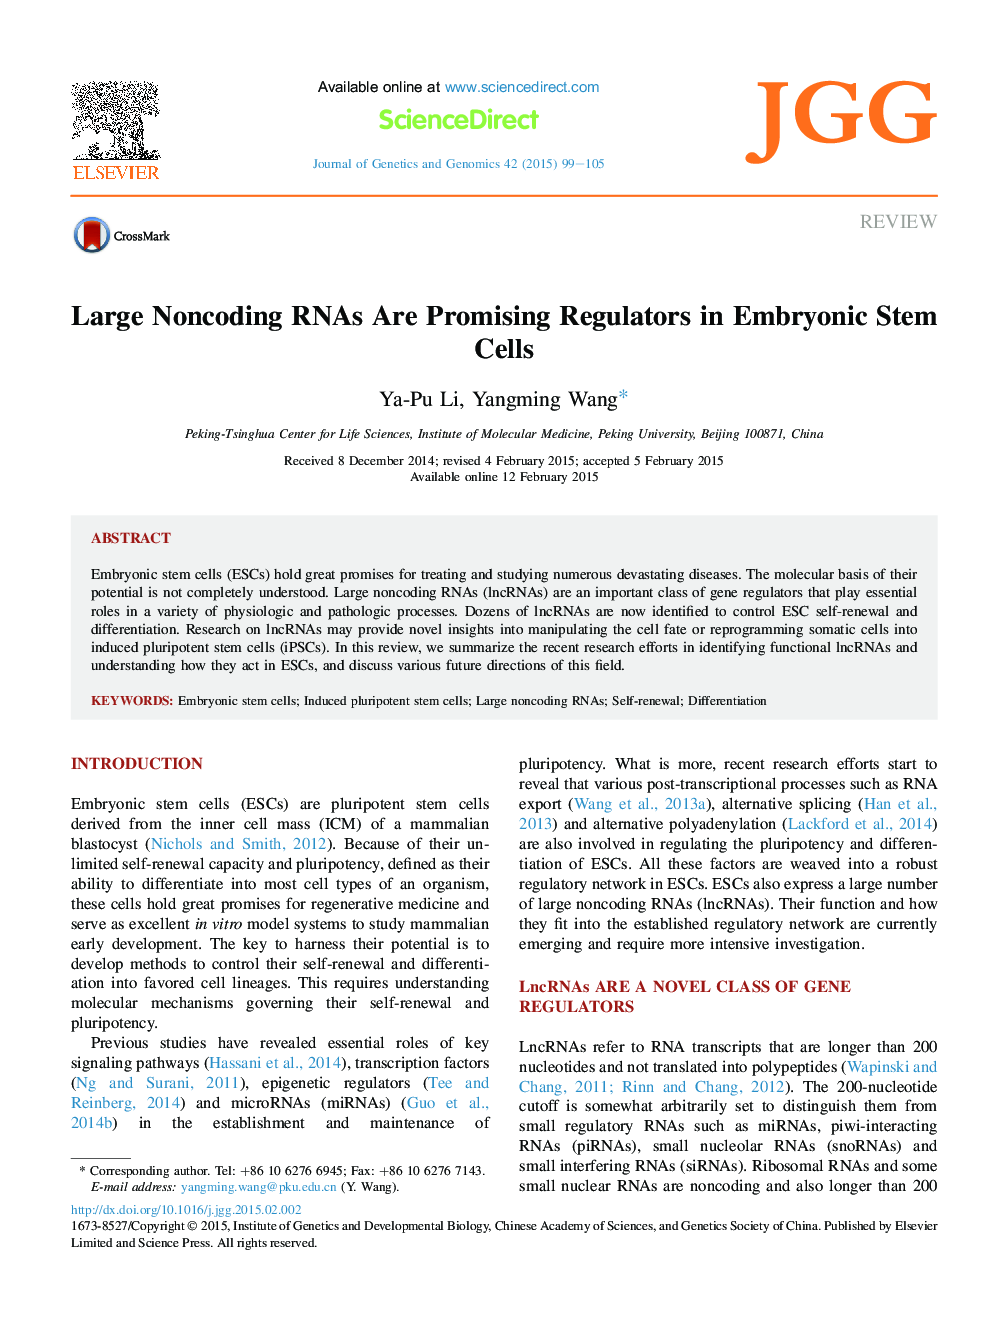 Large Noncoding RNAs Are Promising Regulators in Embryonic Stem Cells